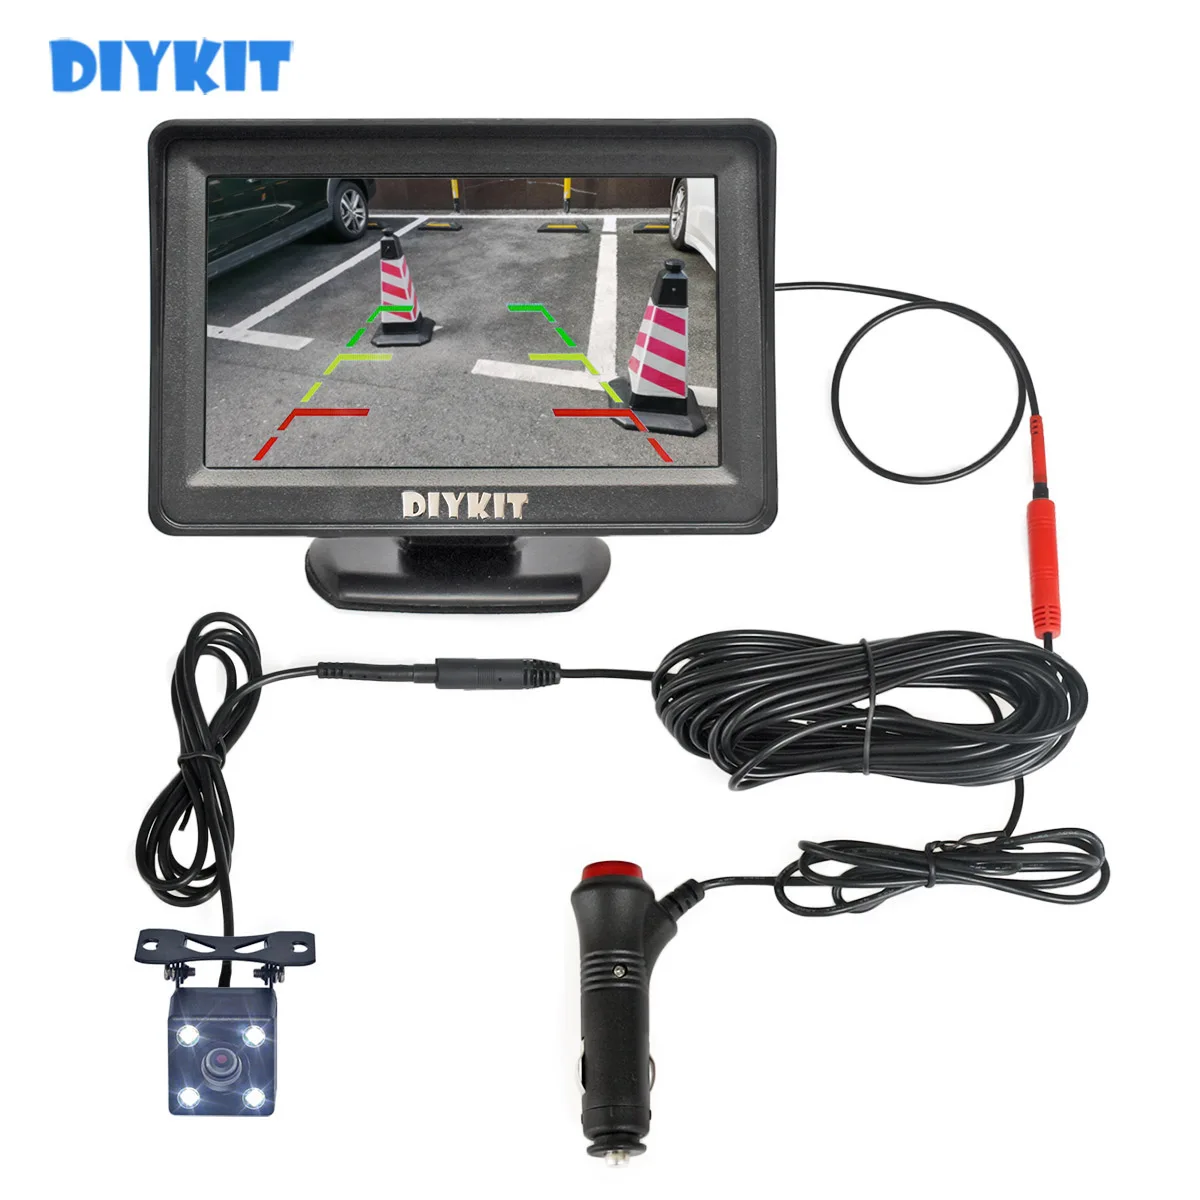 DIYKIT 4.3" Car Monitor Vehicle Rear View Reverse Backup Car LED Camera Video Parking System Car Charger Easy Installation